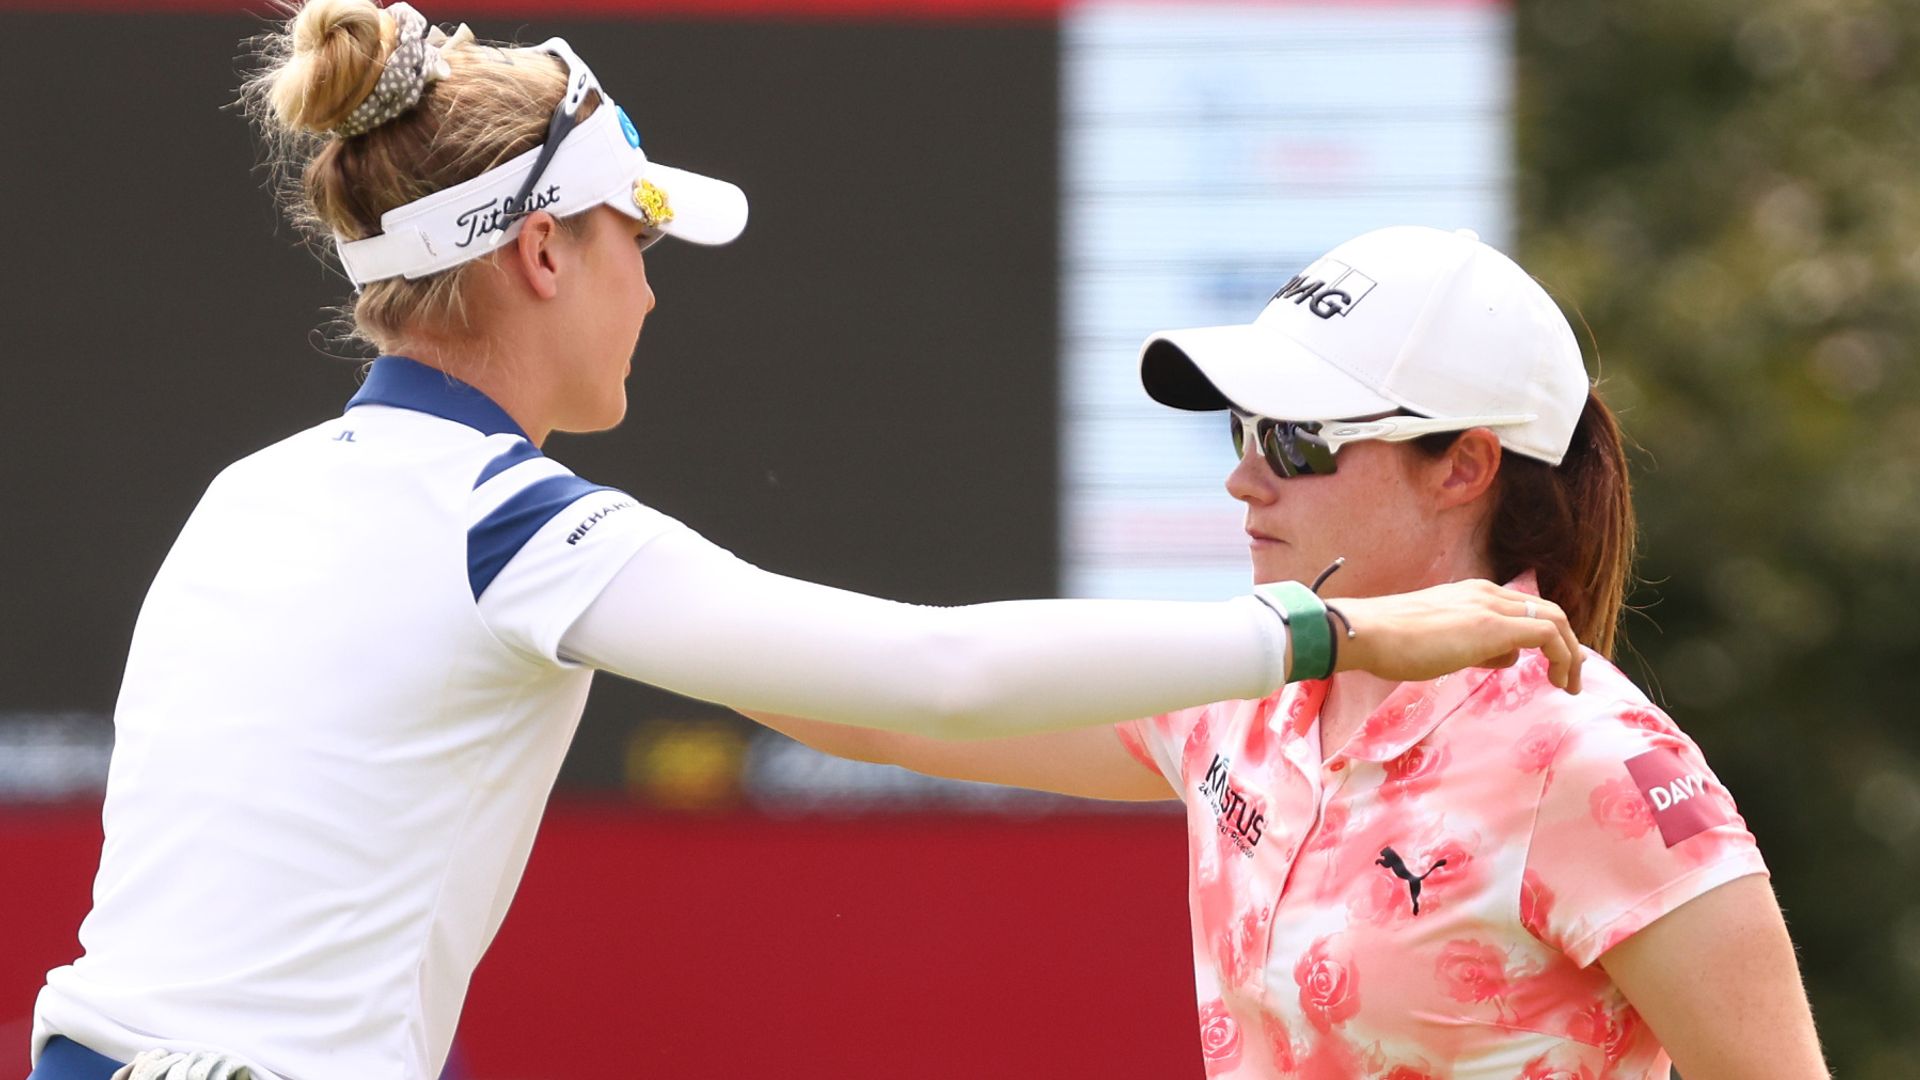 PODCAST: Who will impress at AIG Women's Open?